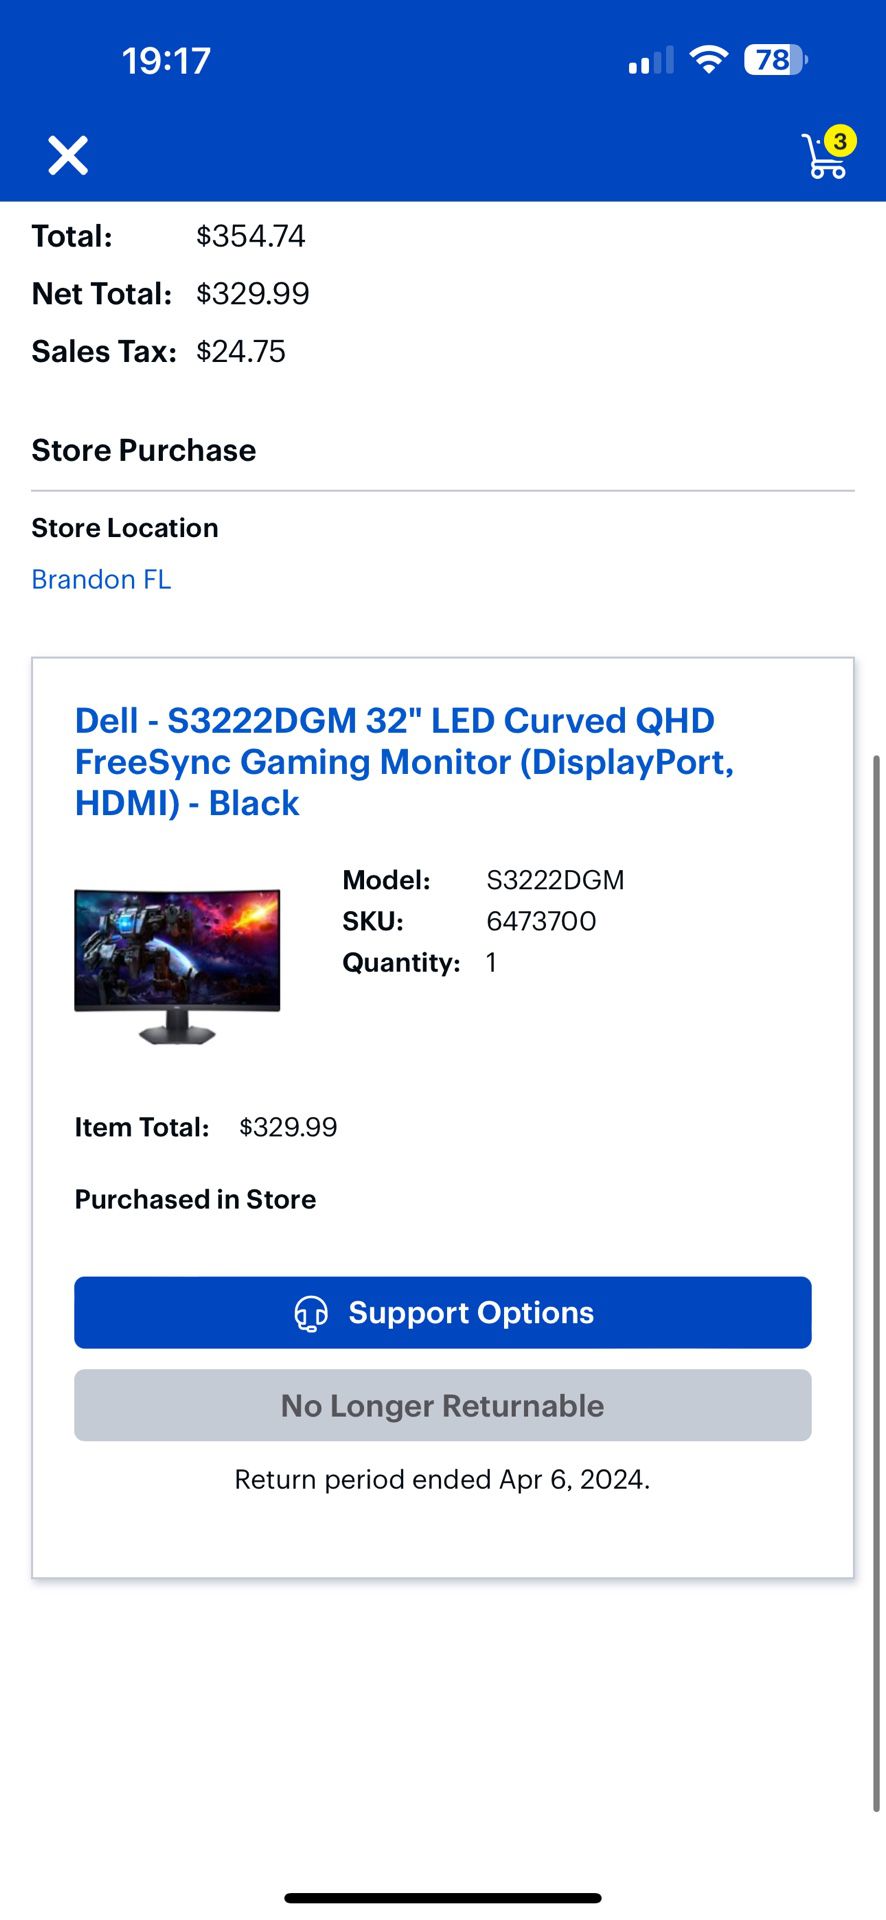 BRAND NEW In Box 32” Curved Dell S3222DGM Gaming Monitor 1440p 175hz.